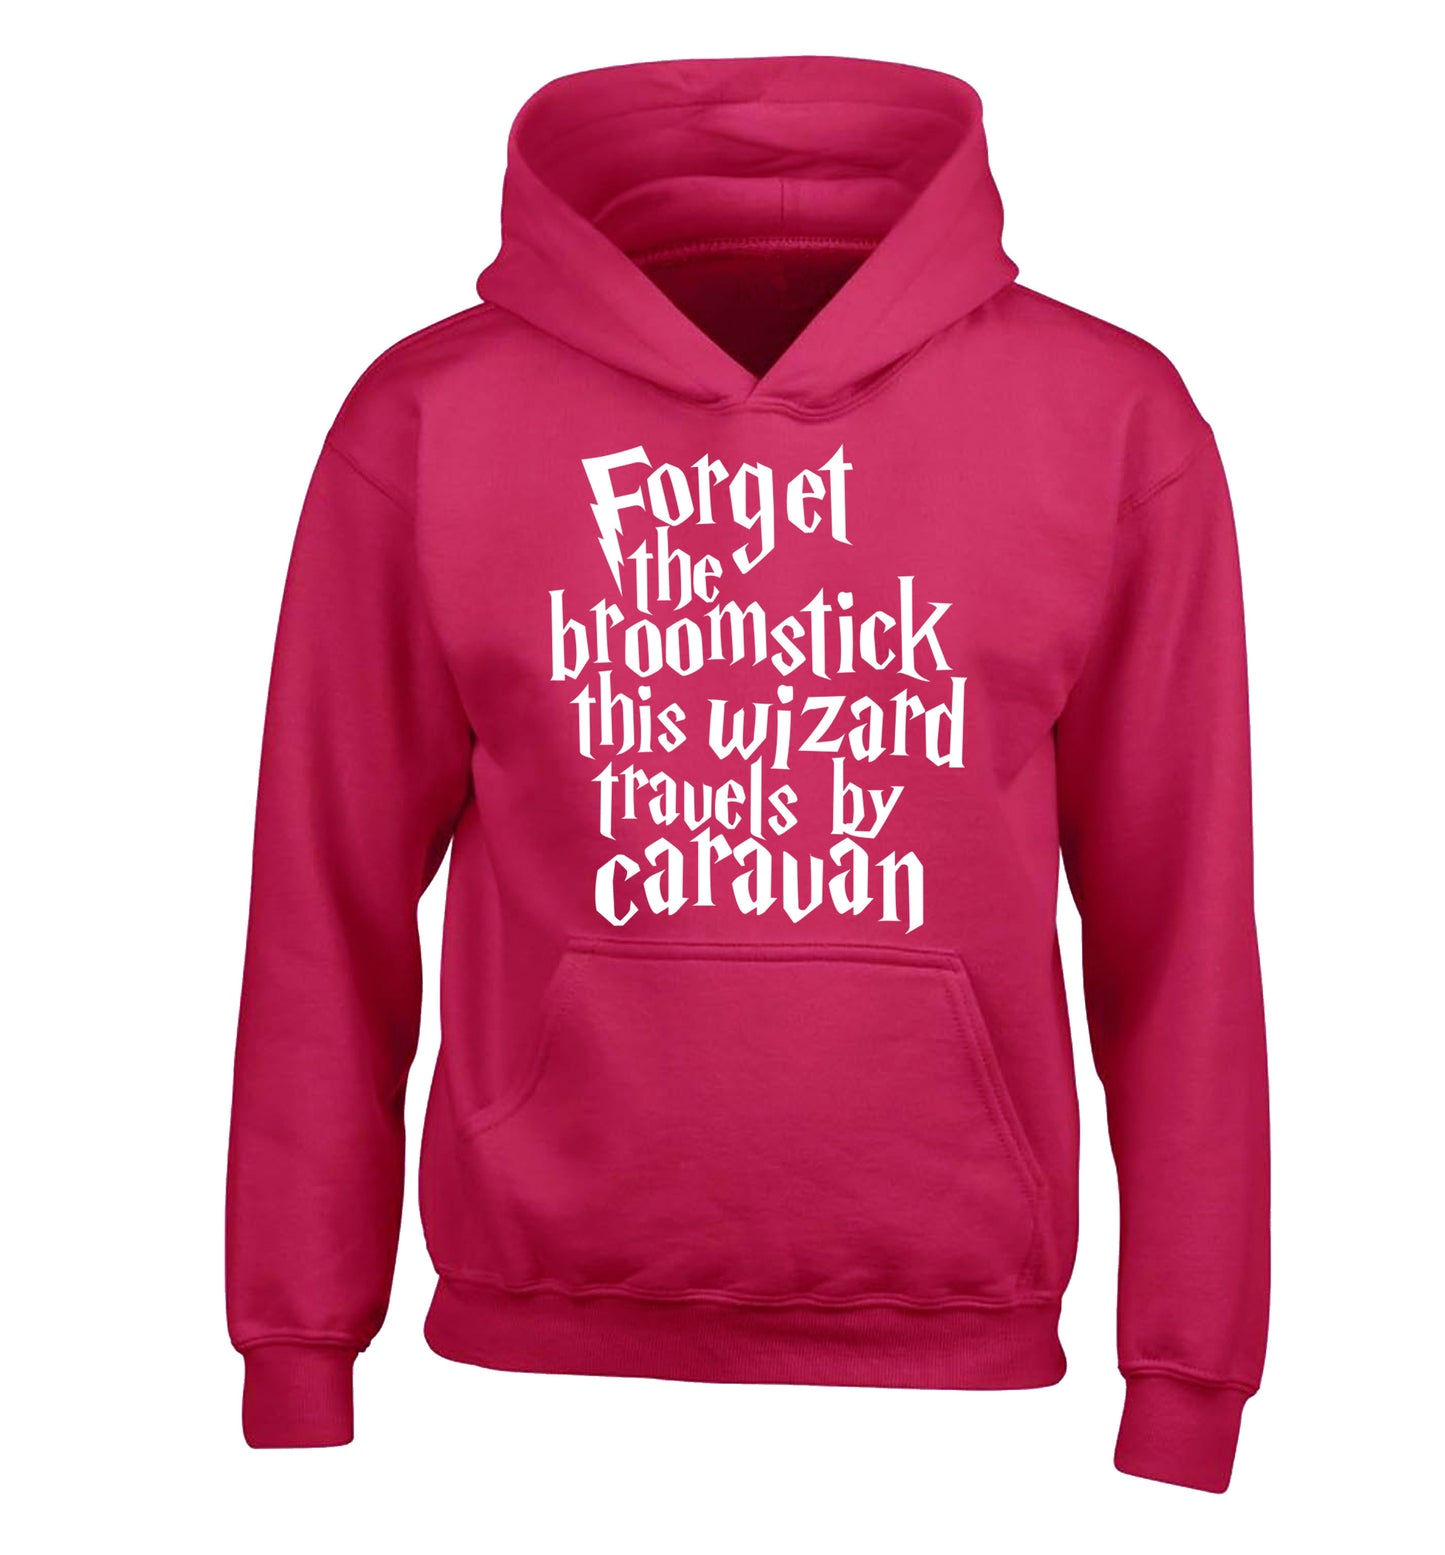 Forget the broomstick this wizard travels by caravan children's pink hoodie 12-14 Years